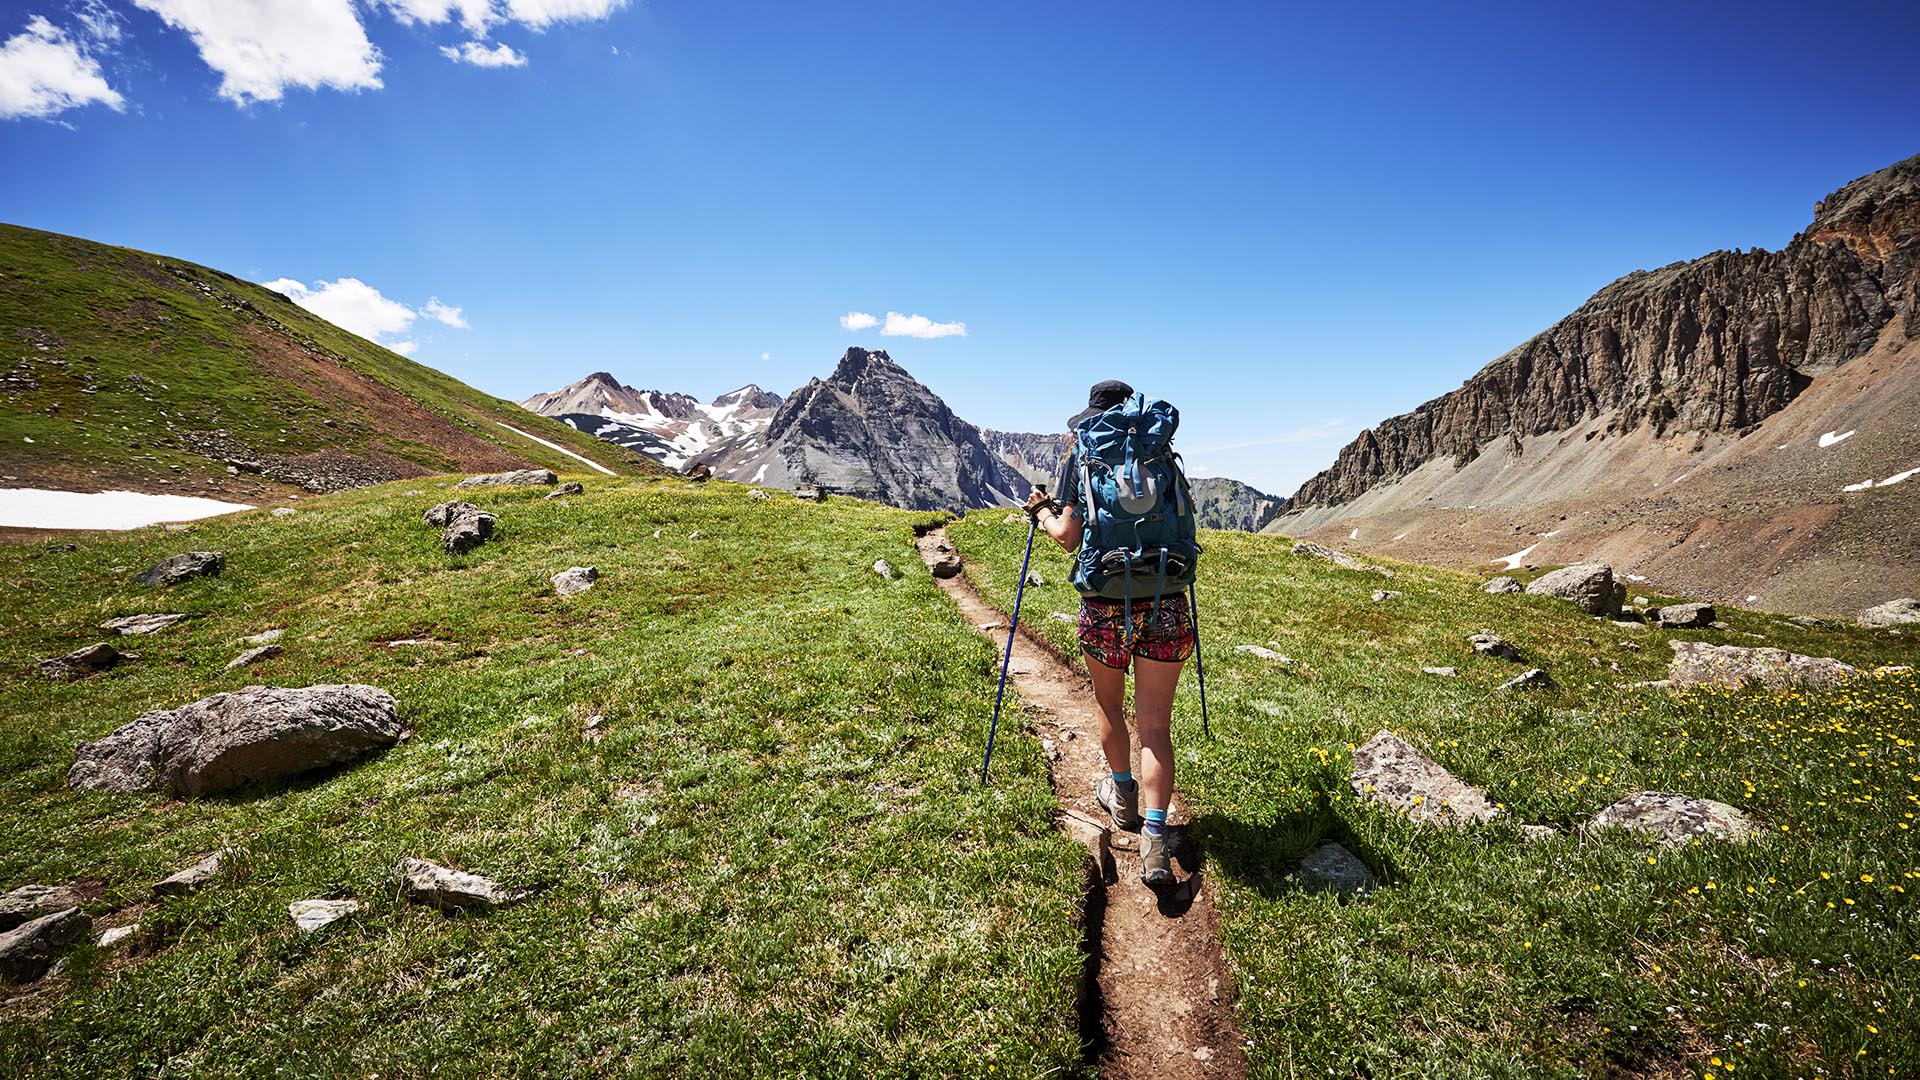 A young woman hiking with backpack in the mountains